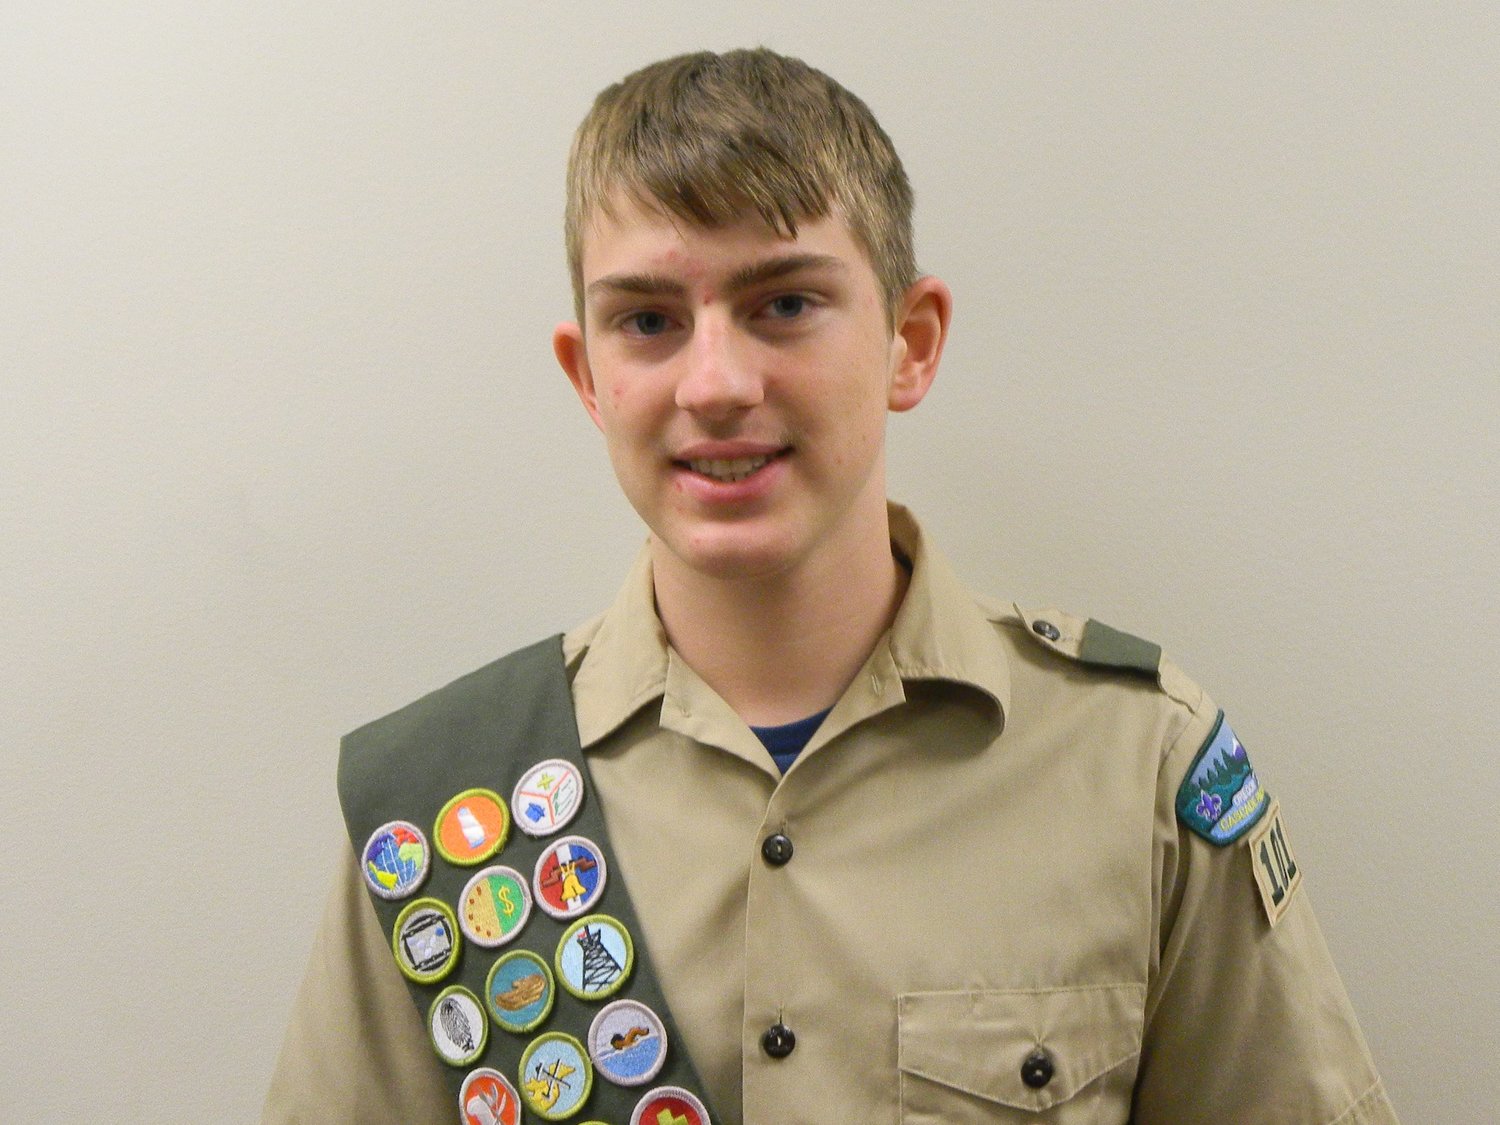 Jacob Brendan Connellof Boy Scout Troop 101 led a group of scouts and adult volunteers in making educational art kits for Gisenyi, Rwanda for a total of 49 hours of community service. Jacob, 15, is the son of Gregory and Shannon Connell. He is a sophomore at Union High School.